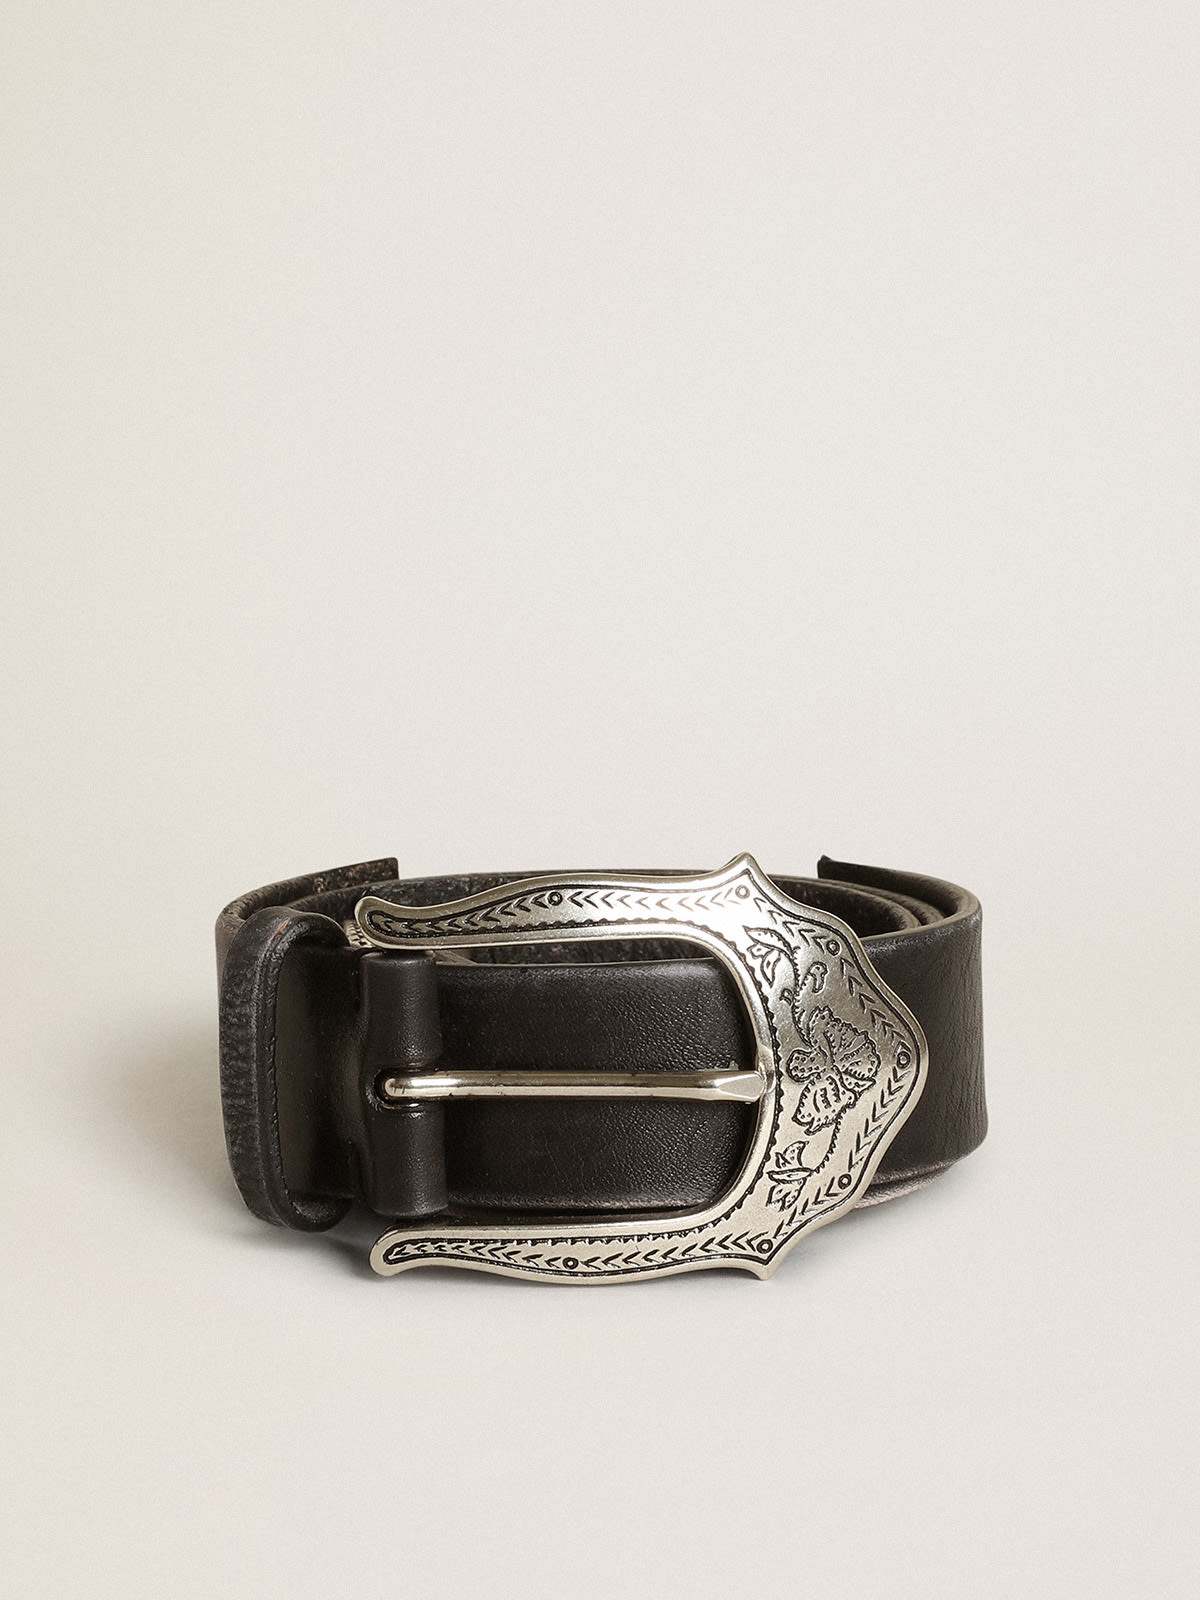 Golden Goose - Women's belt in black leather with silver decorations in 